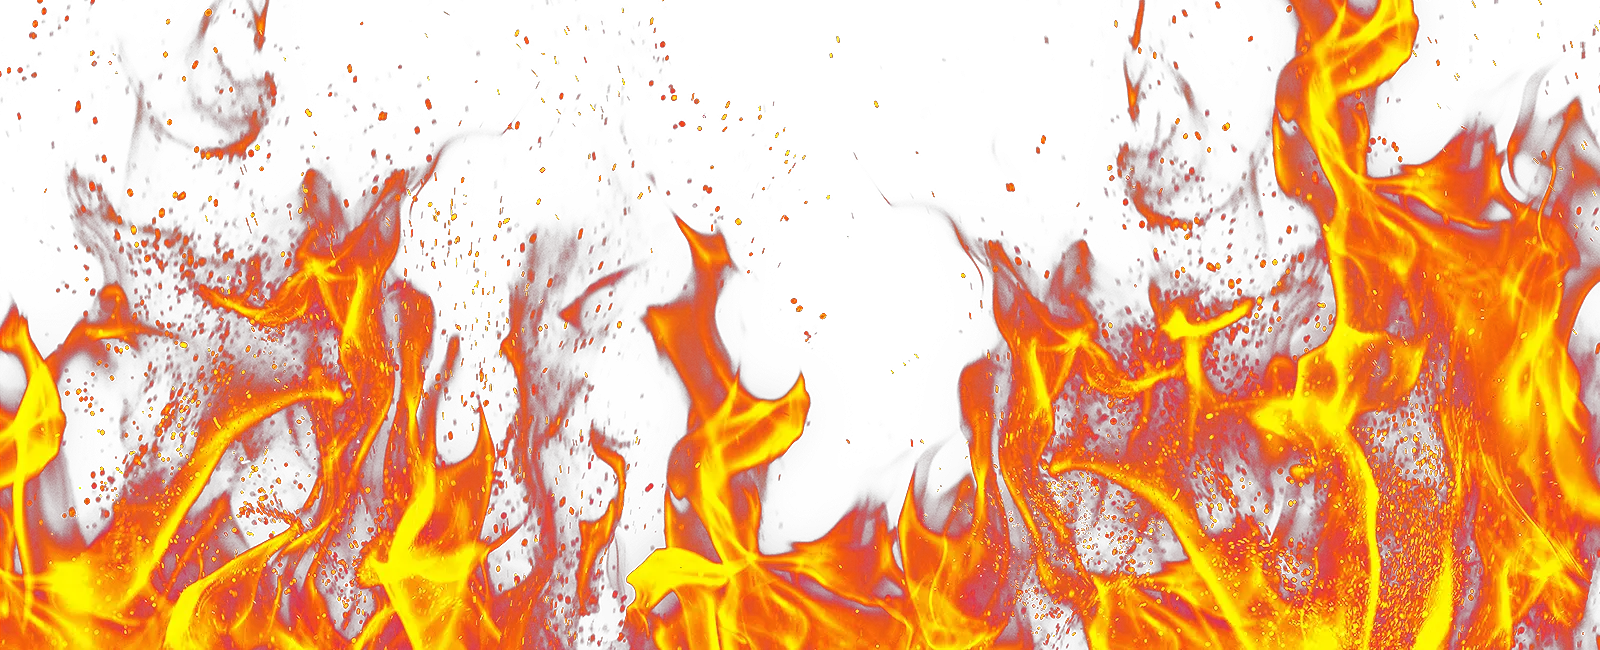 Fire Png Free Download